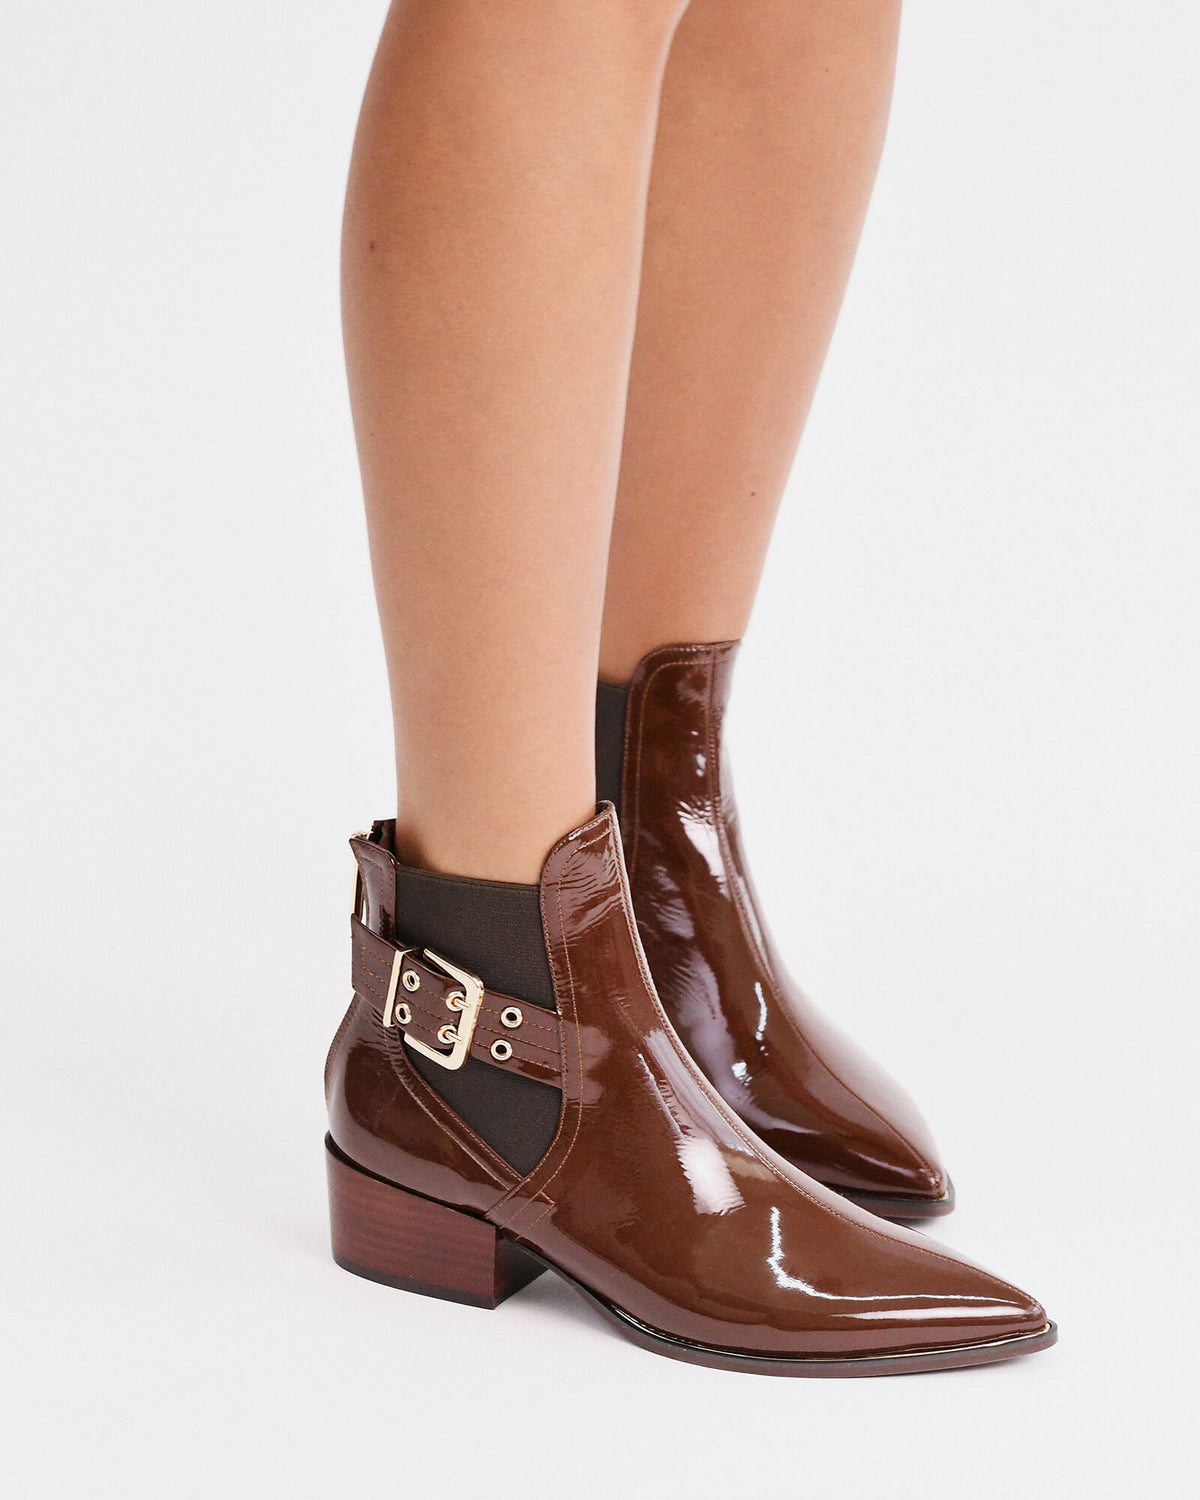 RIVER FLAT ANKLE BOOTS DARK CHOC CRINKLE PATENT